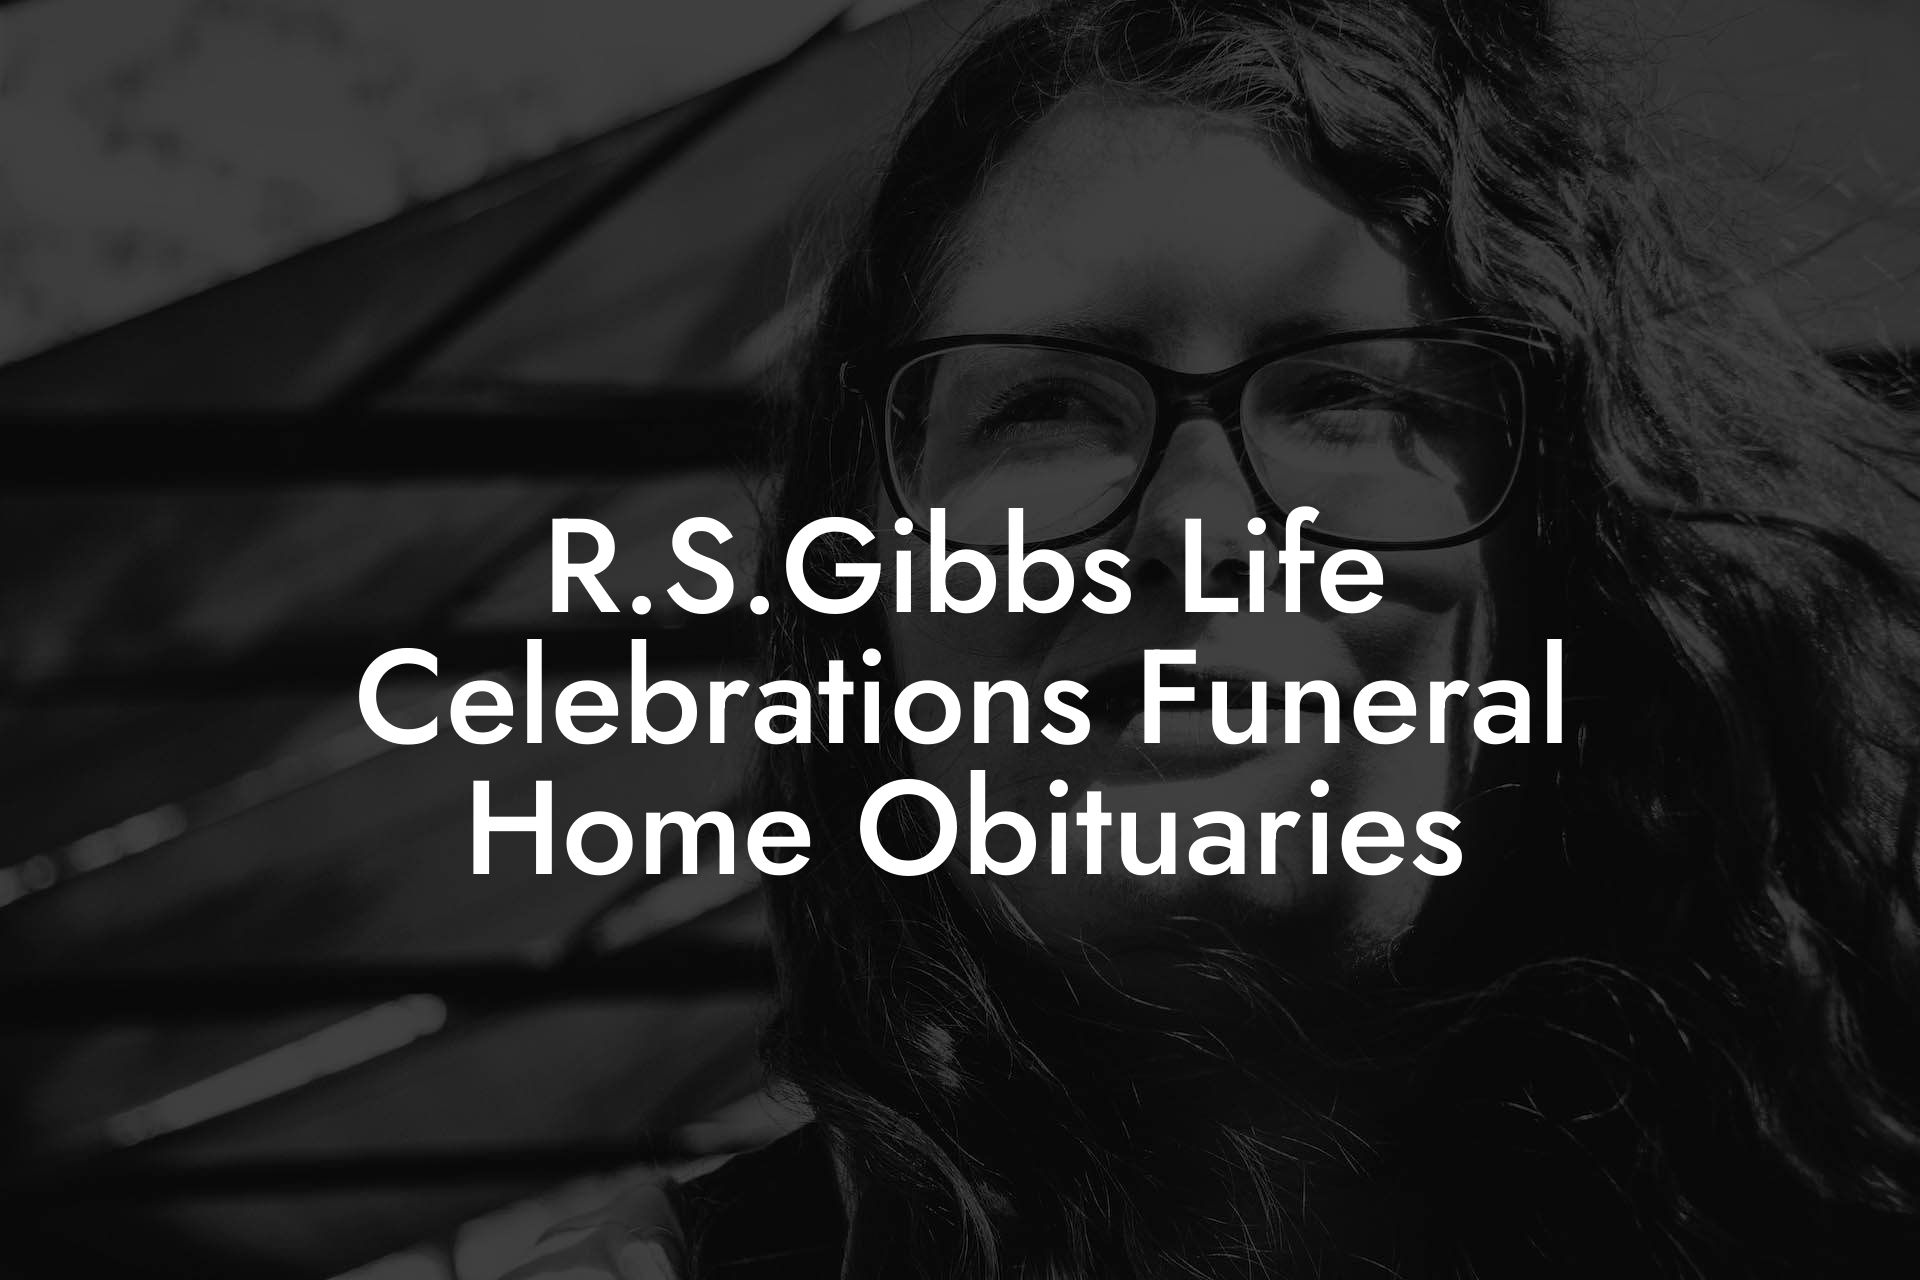 R.S.Gibbs Life Celebrations Funeral Home Obituaries